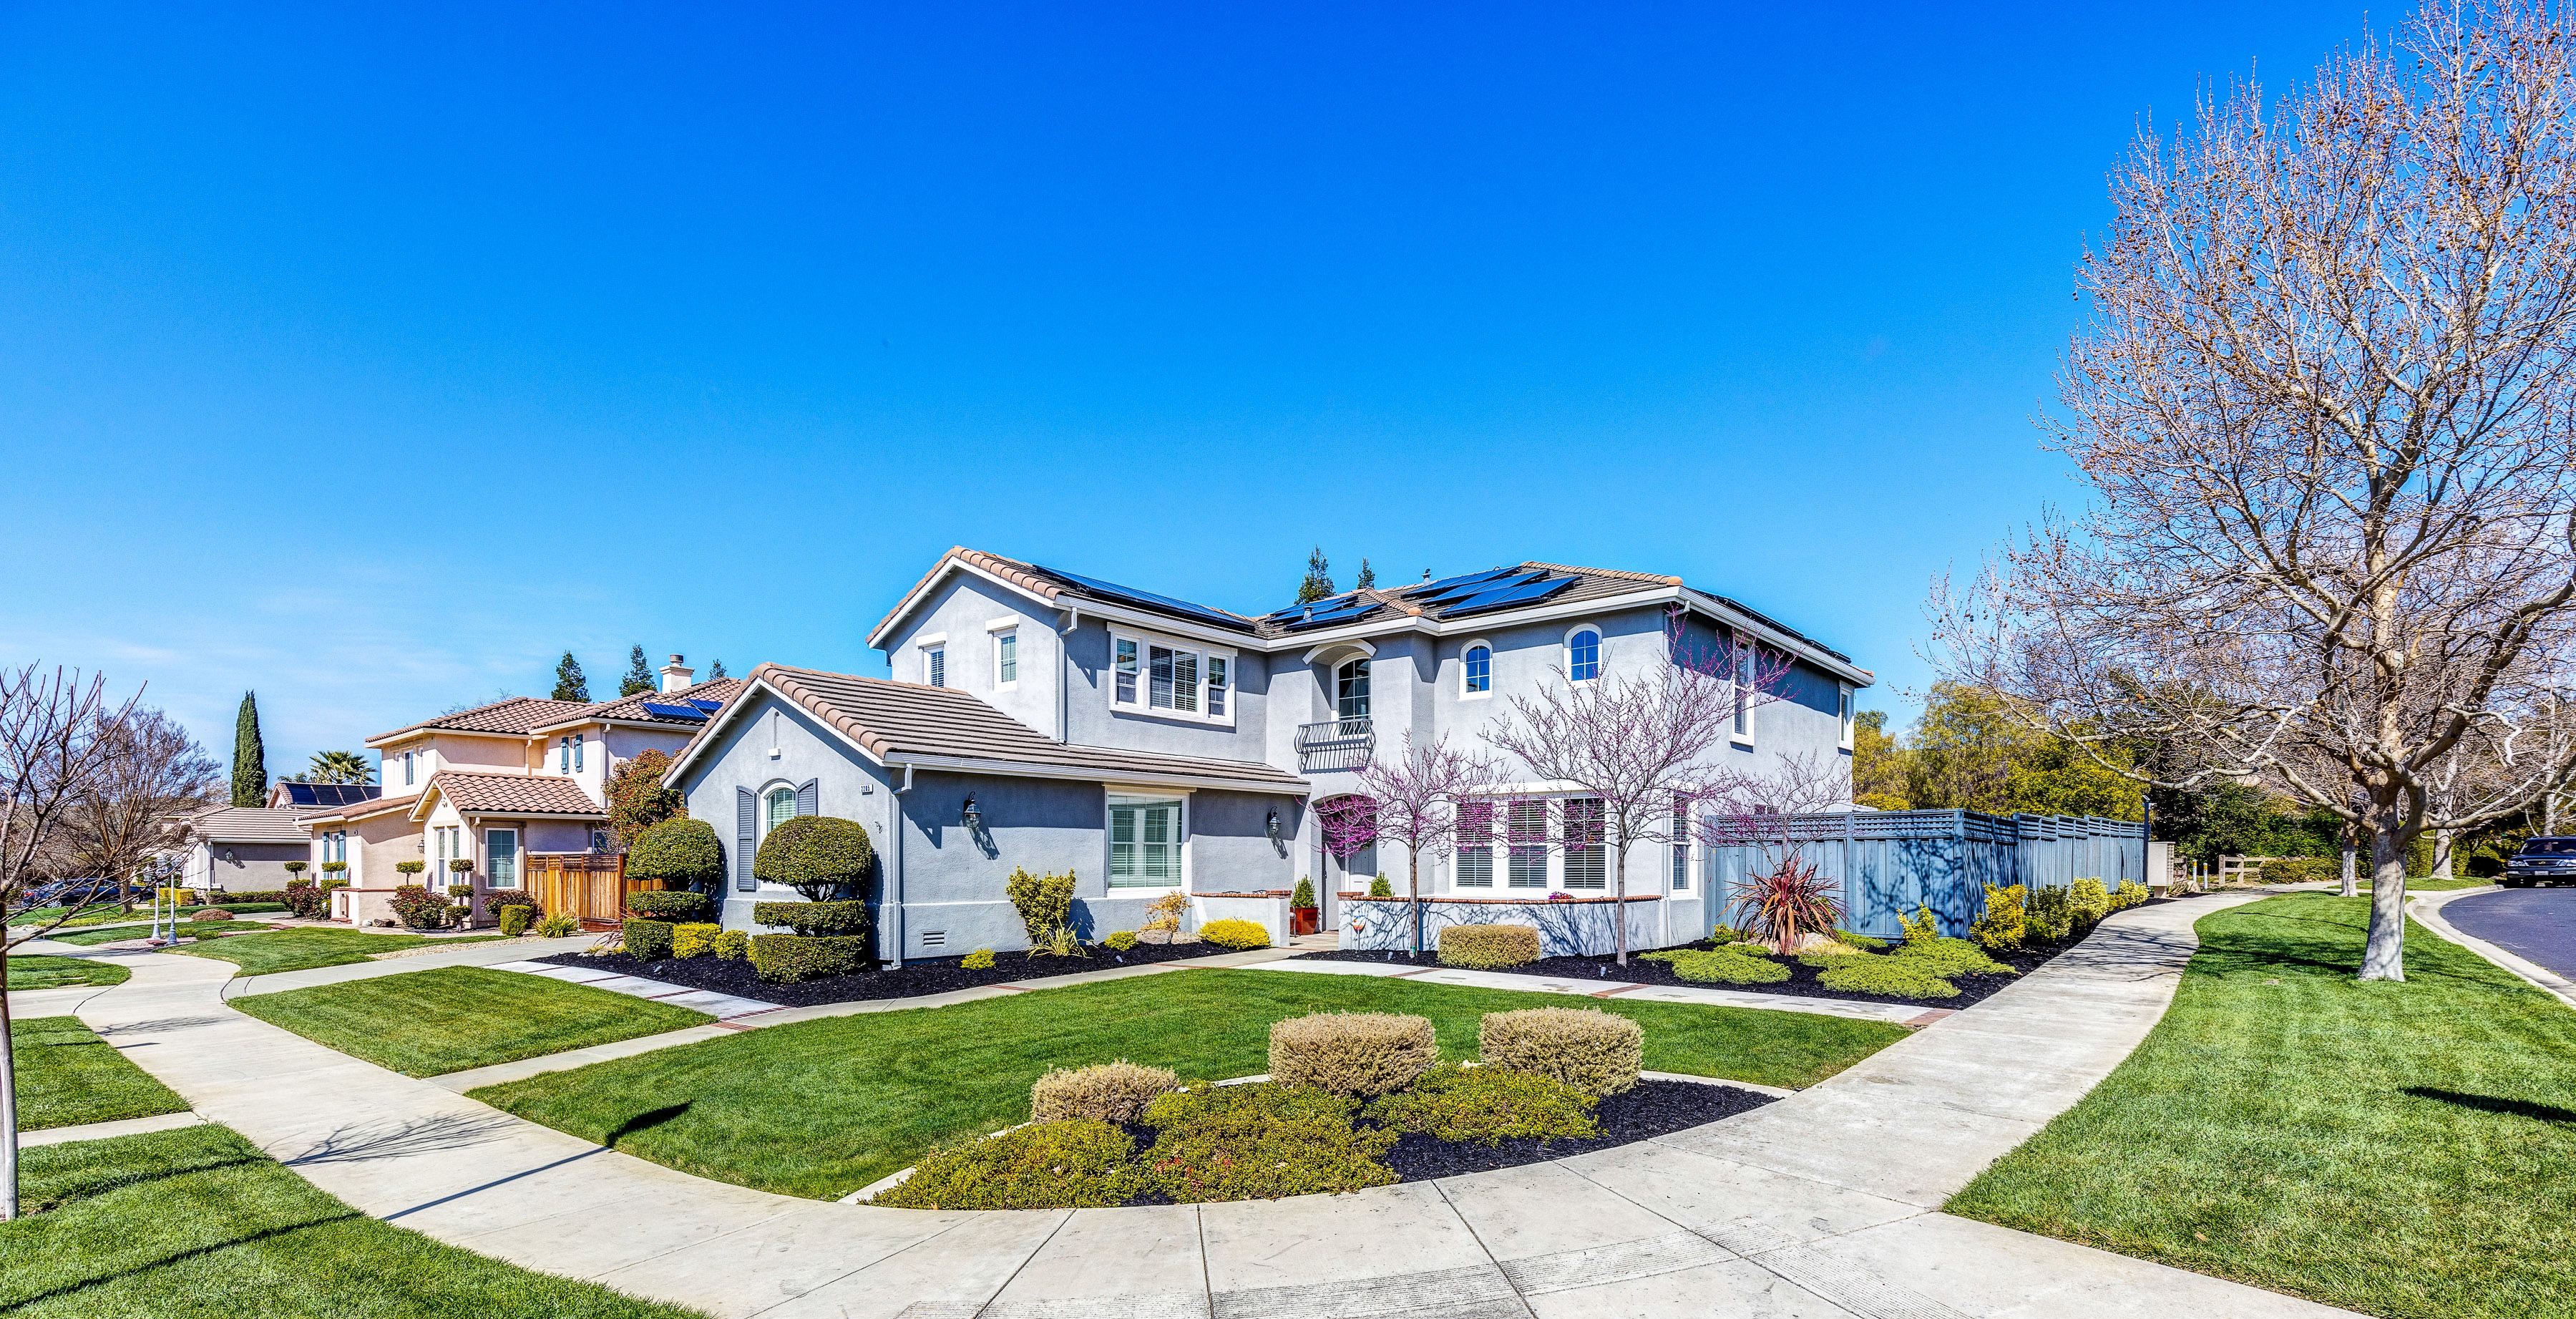 $2,150,000 SOLD BY CYN, Multiple Offers, Livermore Valleys Wine Country!